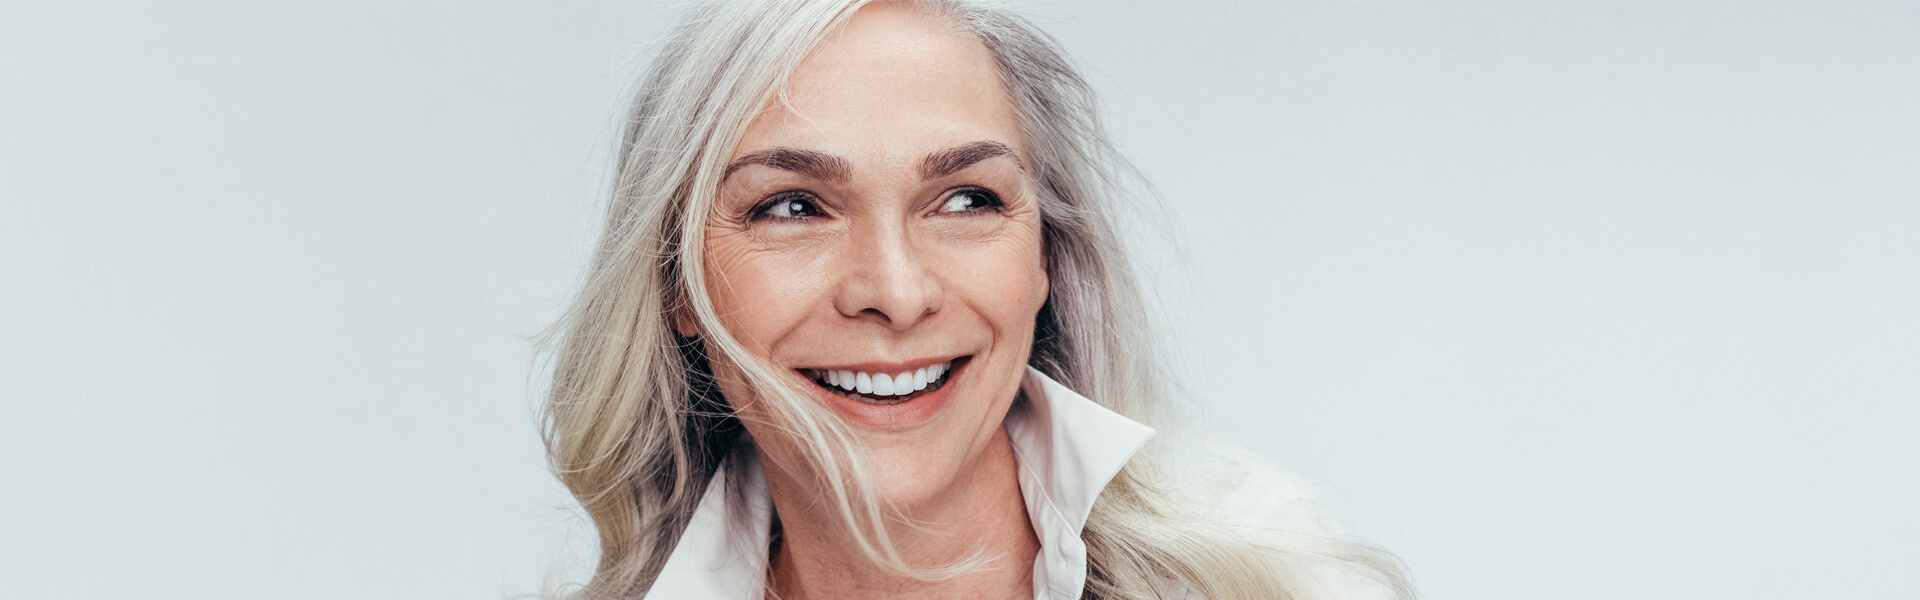 how your smile benefits by having dental implants